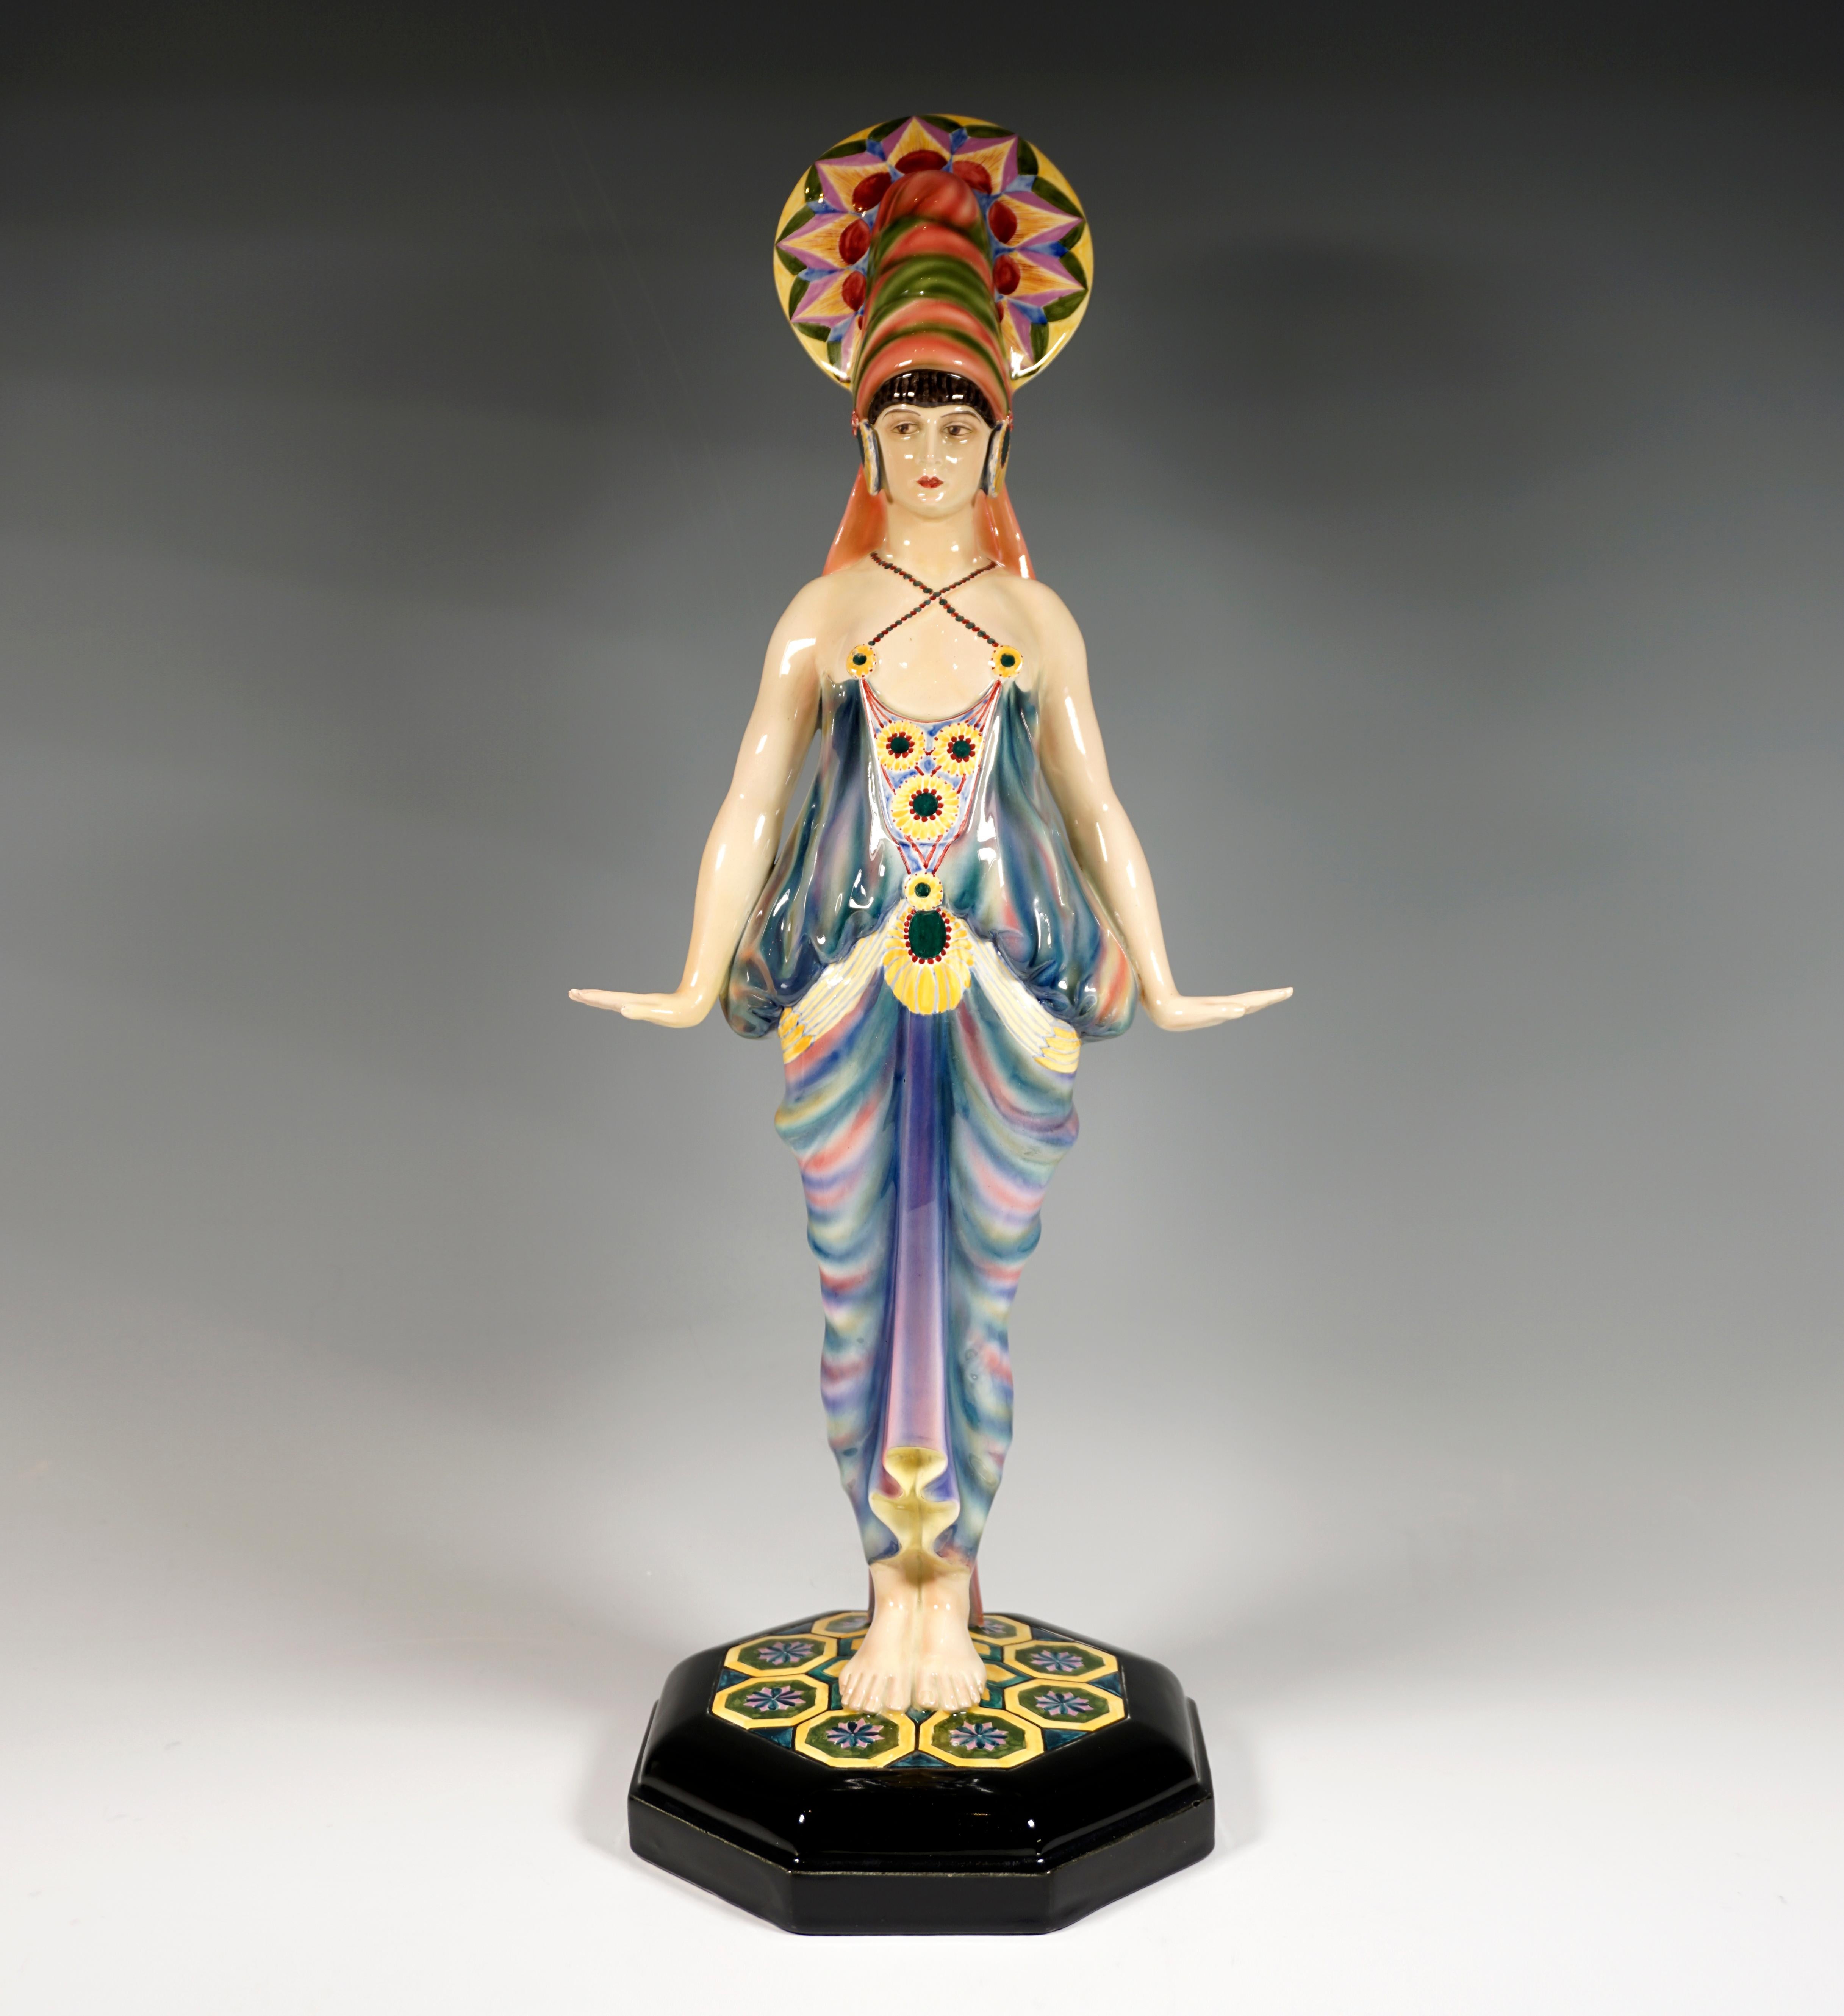 An extraordinary, one-of-a-kind model by Goldscheider, which has never existed before and is not listed in the catalog of works.

The upright dancer with elaborate headdress is dressed in an exotic, softly caressing costume:
The top is attached